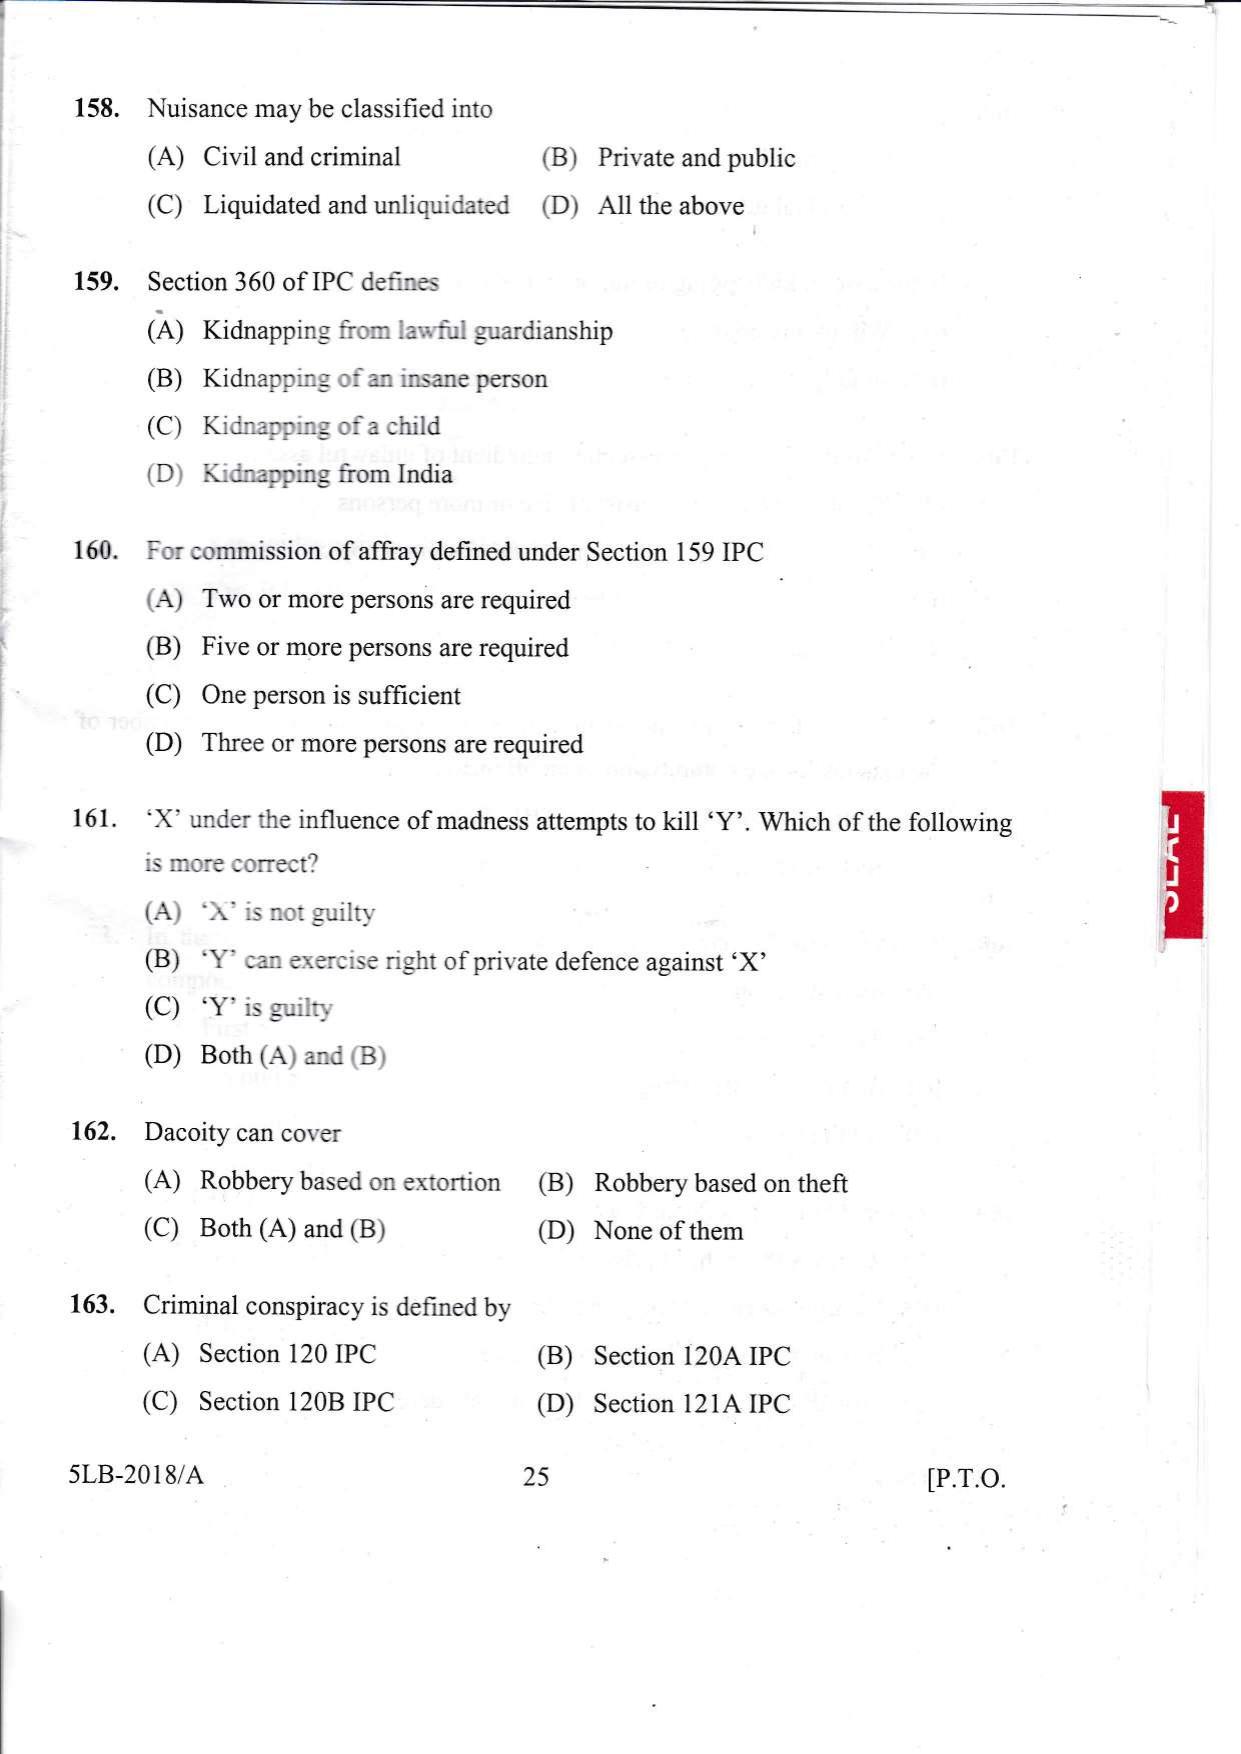 KLEE 5 Year LLB Exam 2018 Question Paper - Page 25